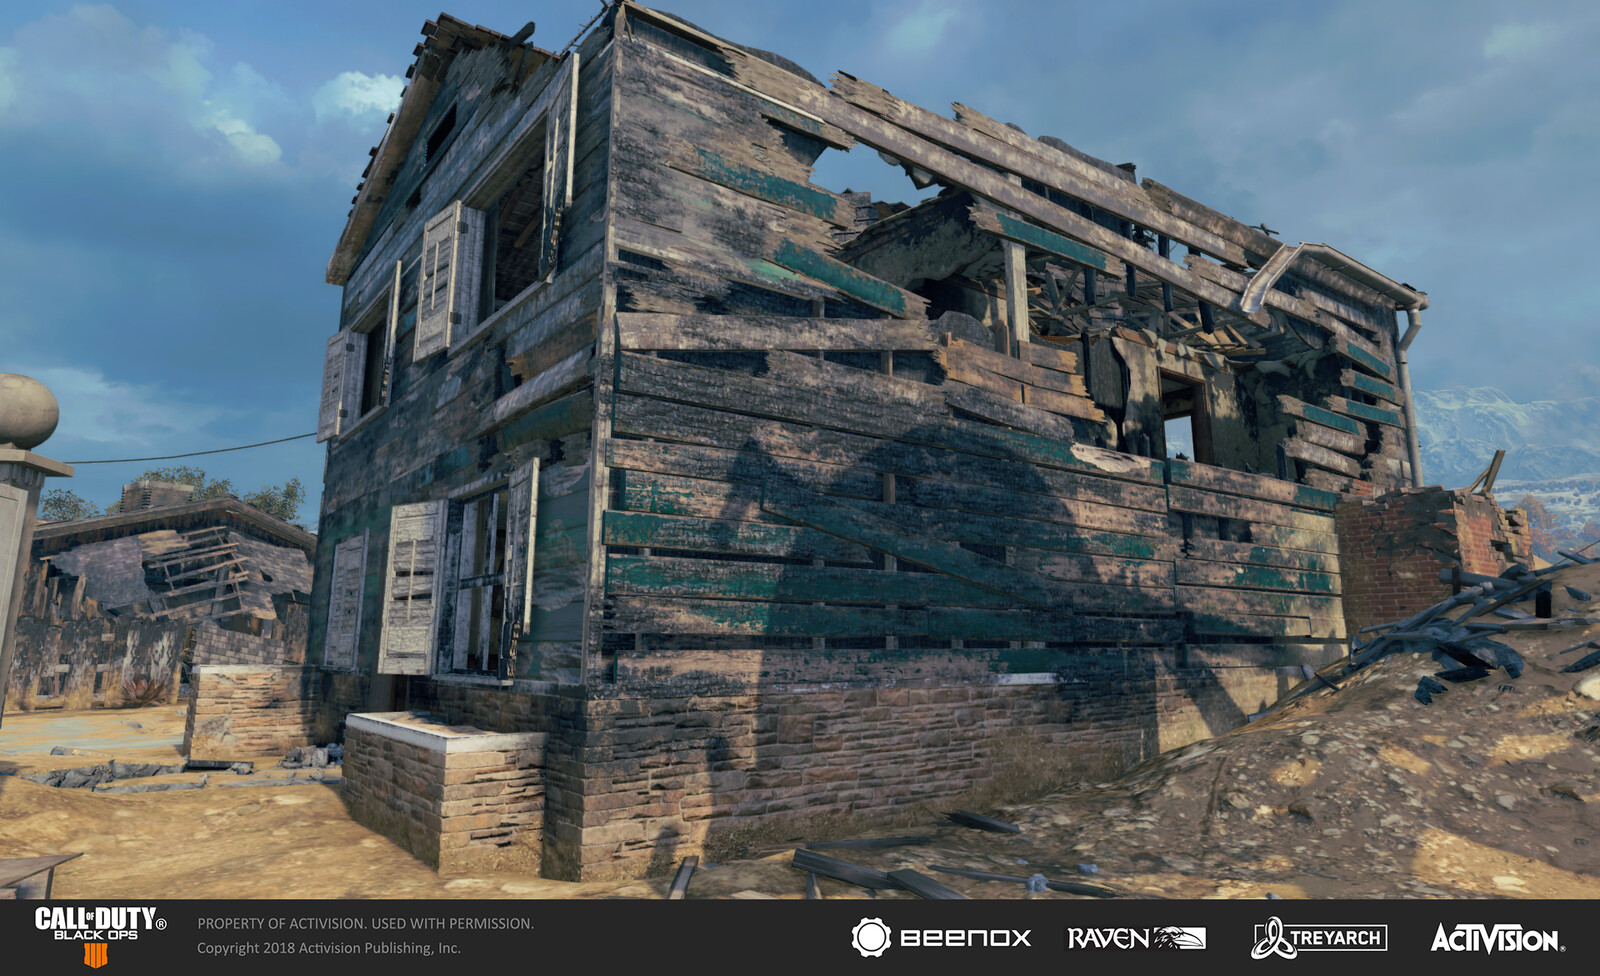 Exterior of one of the main Nuketown houses. The destroyed aesthetic was based on its Black Ops 2 Zombies version. I upgraded the overall fidelity by re-configuring existing materials and models of higher quality.